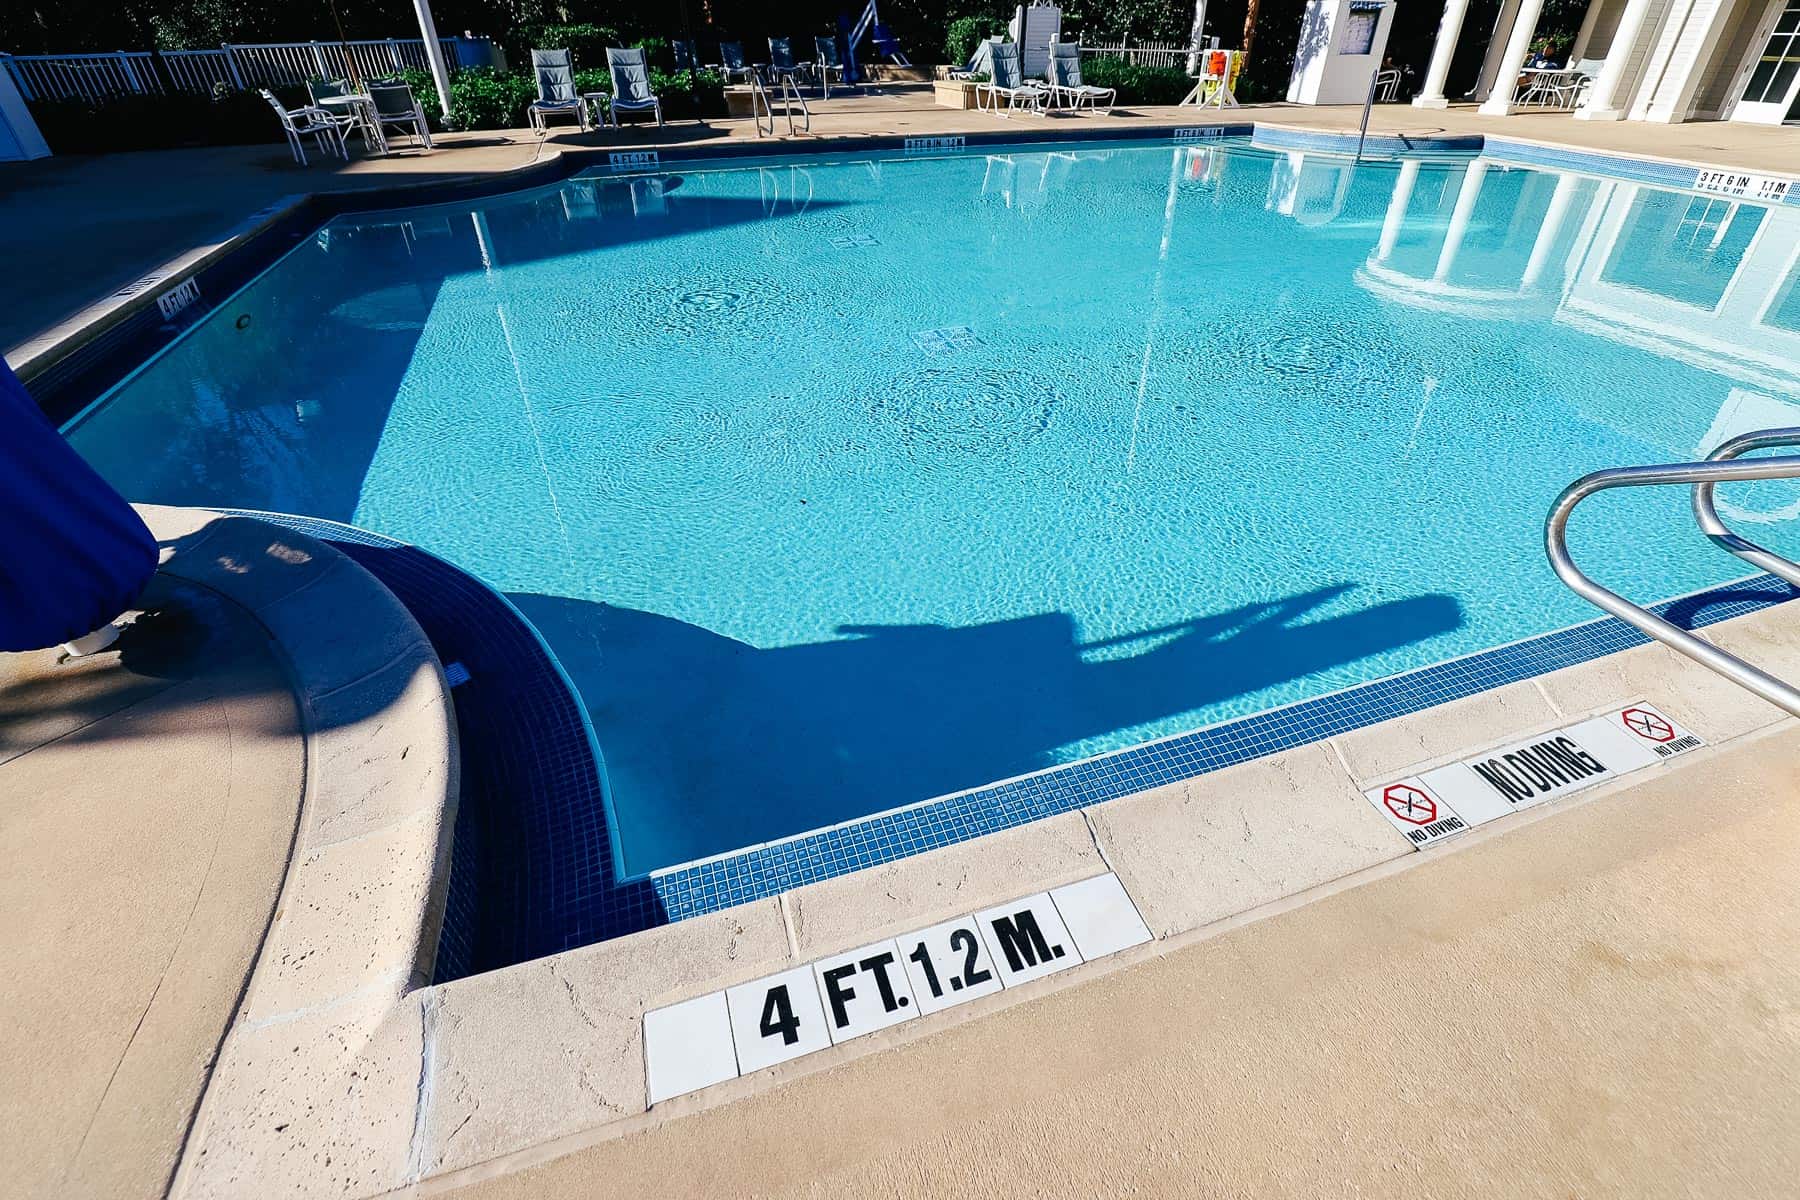 shows the pool depth  is 4 feet